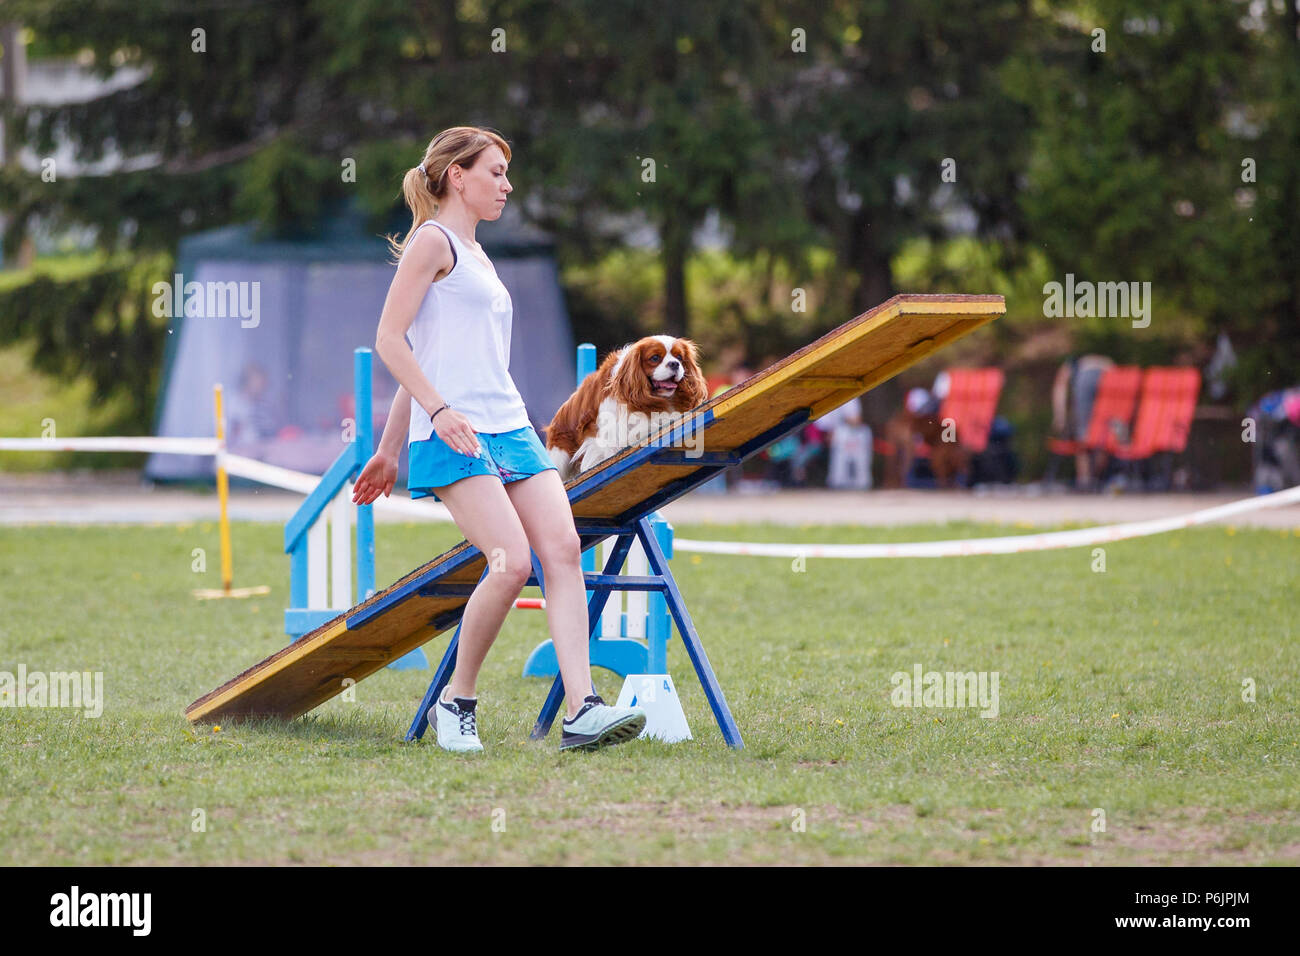 Small dog walking on the seesaw obstacle with young woman aside as handler in agility competition Stock Photo